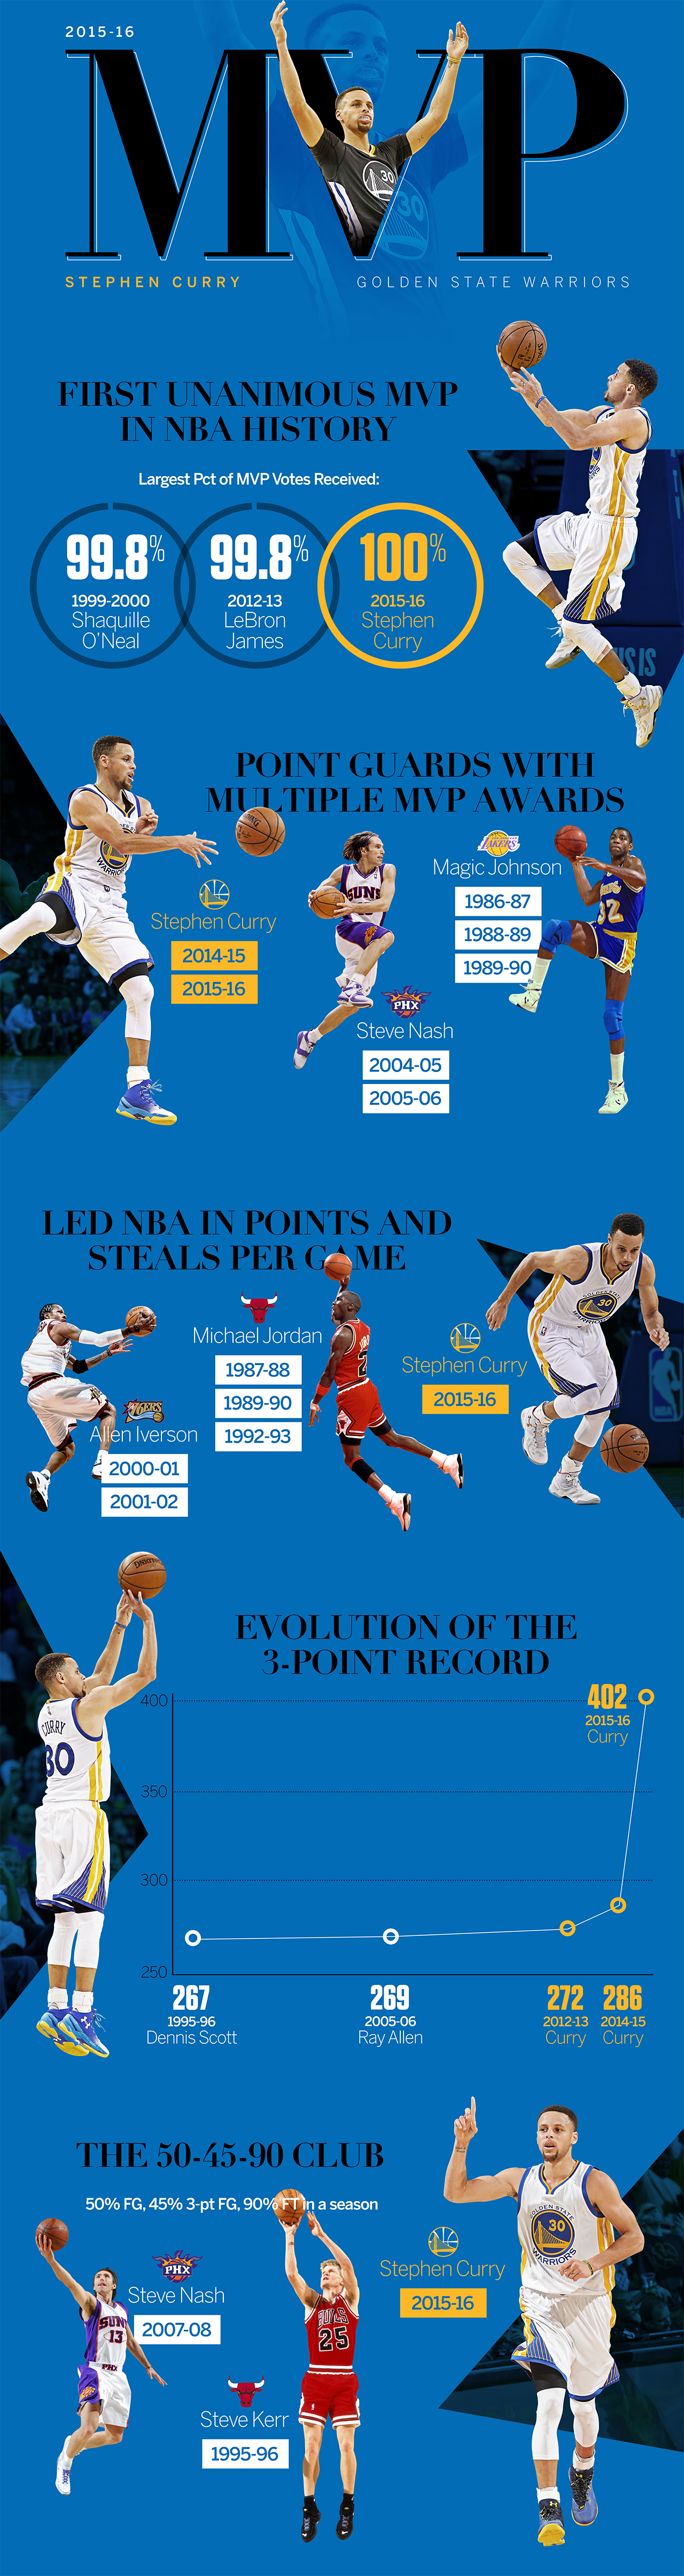 Stephen Curry expected to win NBA MVP ESPN Stats & Info ESPN